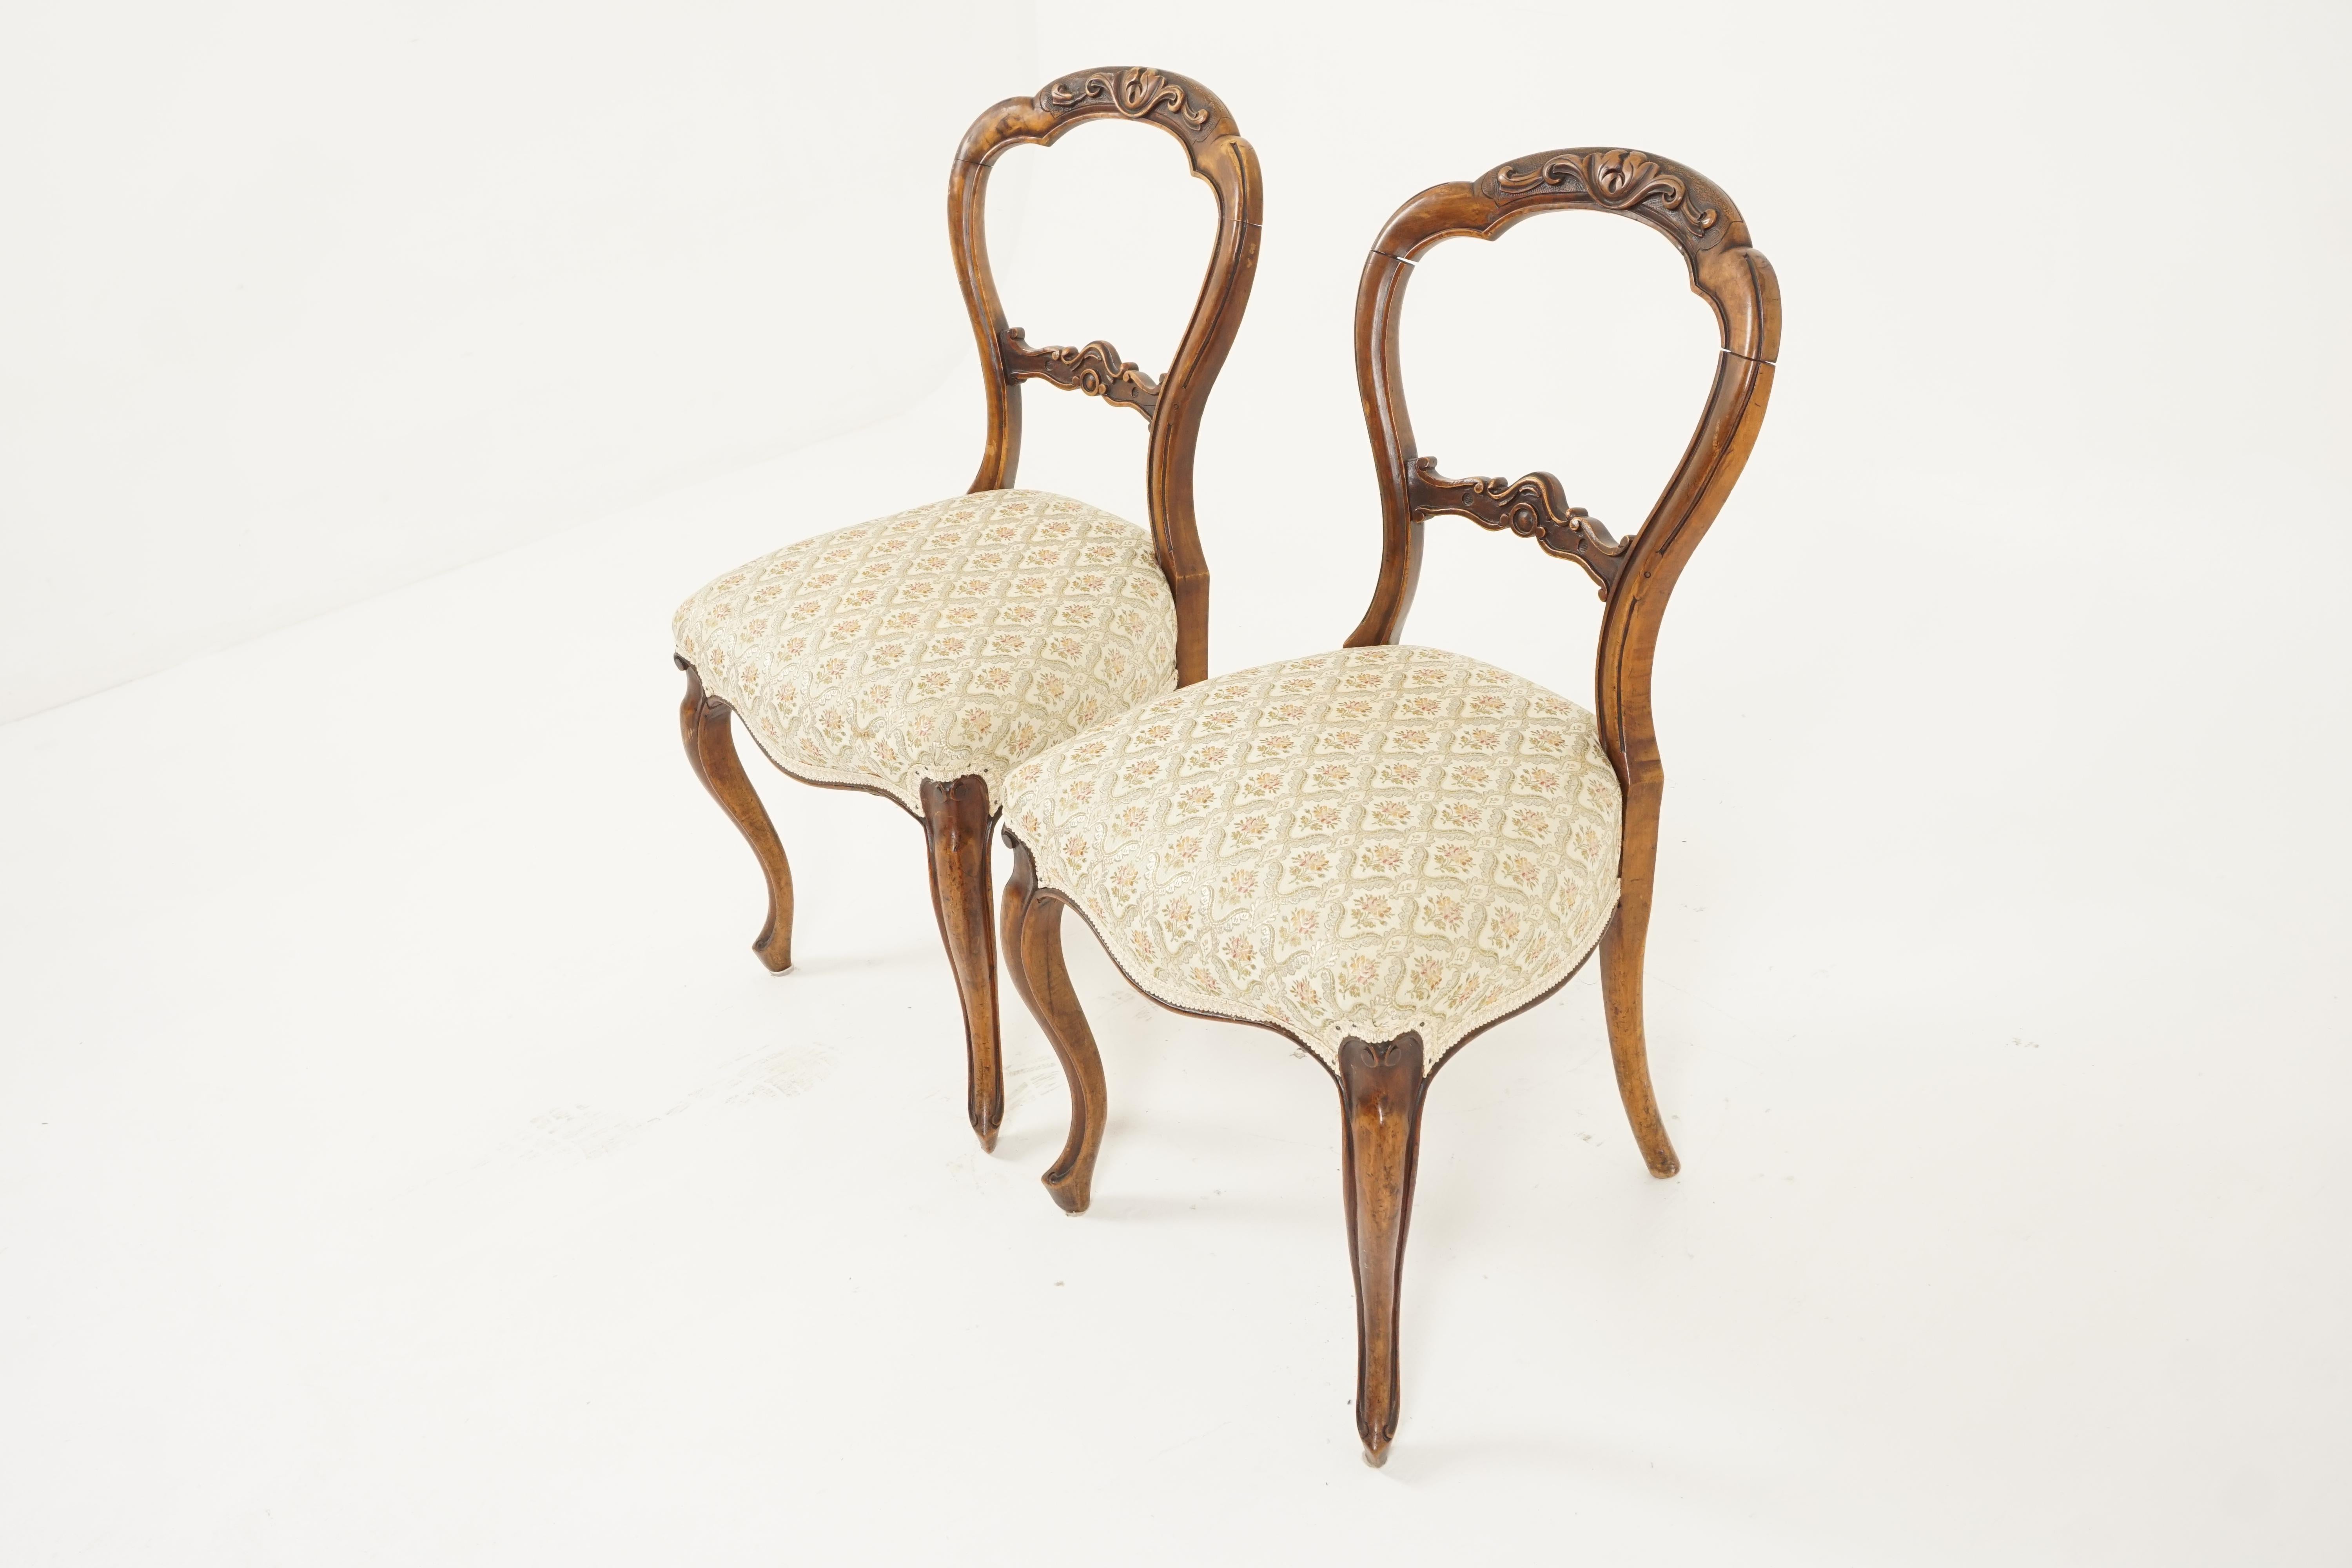 Antique pair of chairs, carved walnut, balloon back, Scotland 1880, B2704

Scotland 1880
Solid walnut
Original finish
The elegant balloon shaped back with hand carved detailing to the top and bottom rail
Upholstered seat below
All standing on